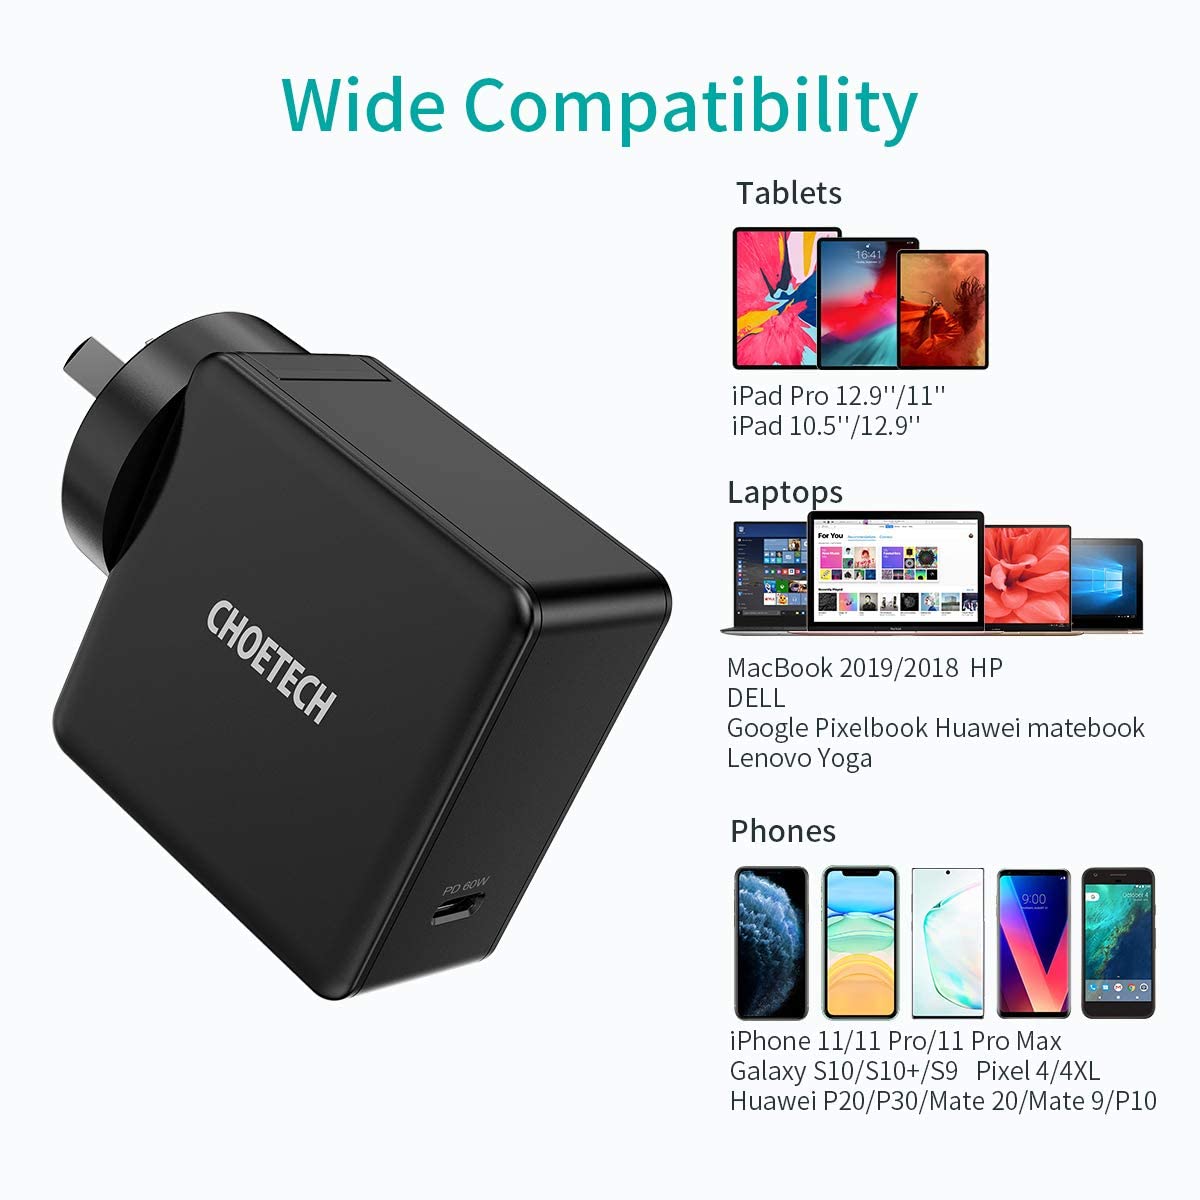 CHOETECH 60W USB-C PD Wall Charger Type C Fast Charge Power Adapter AU PLUG